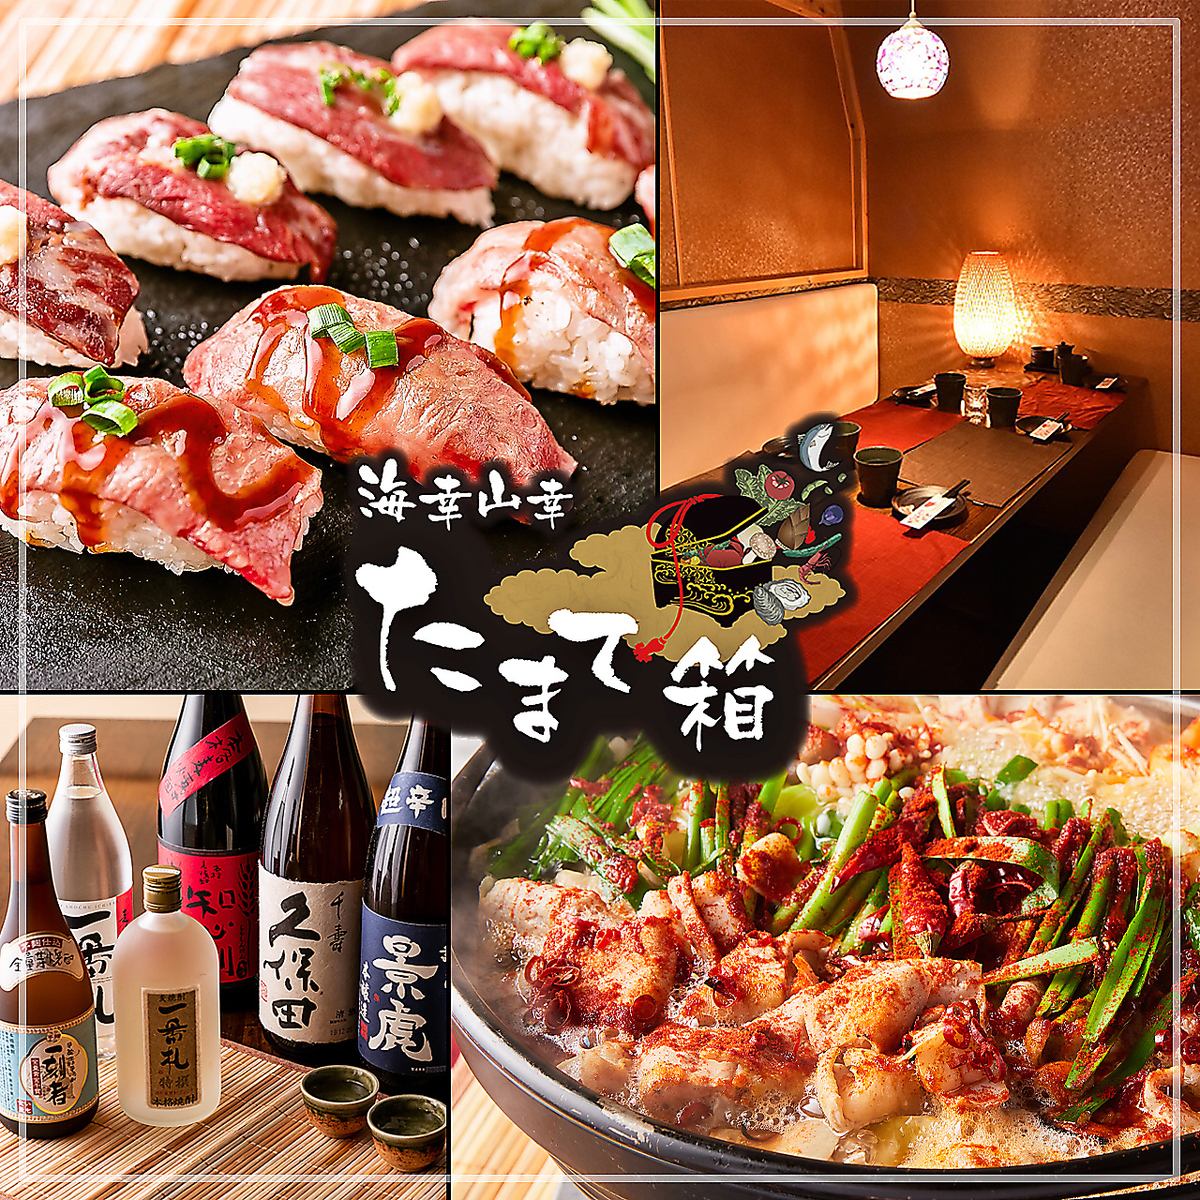 A completely private izakaya 1 minute from Shinjuku West Exit★A banquet where you can enjoy the delicacies of the sea and mountains!All-you-can-drink carefully selected Japanese sake is also available◎